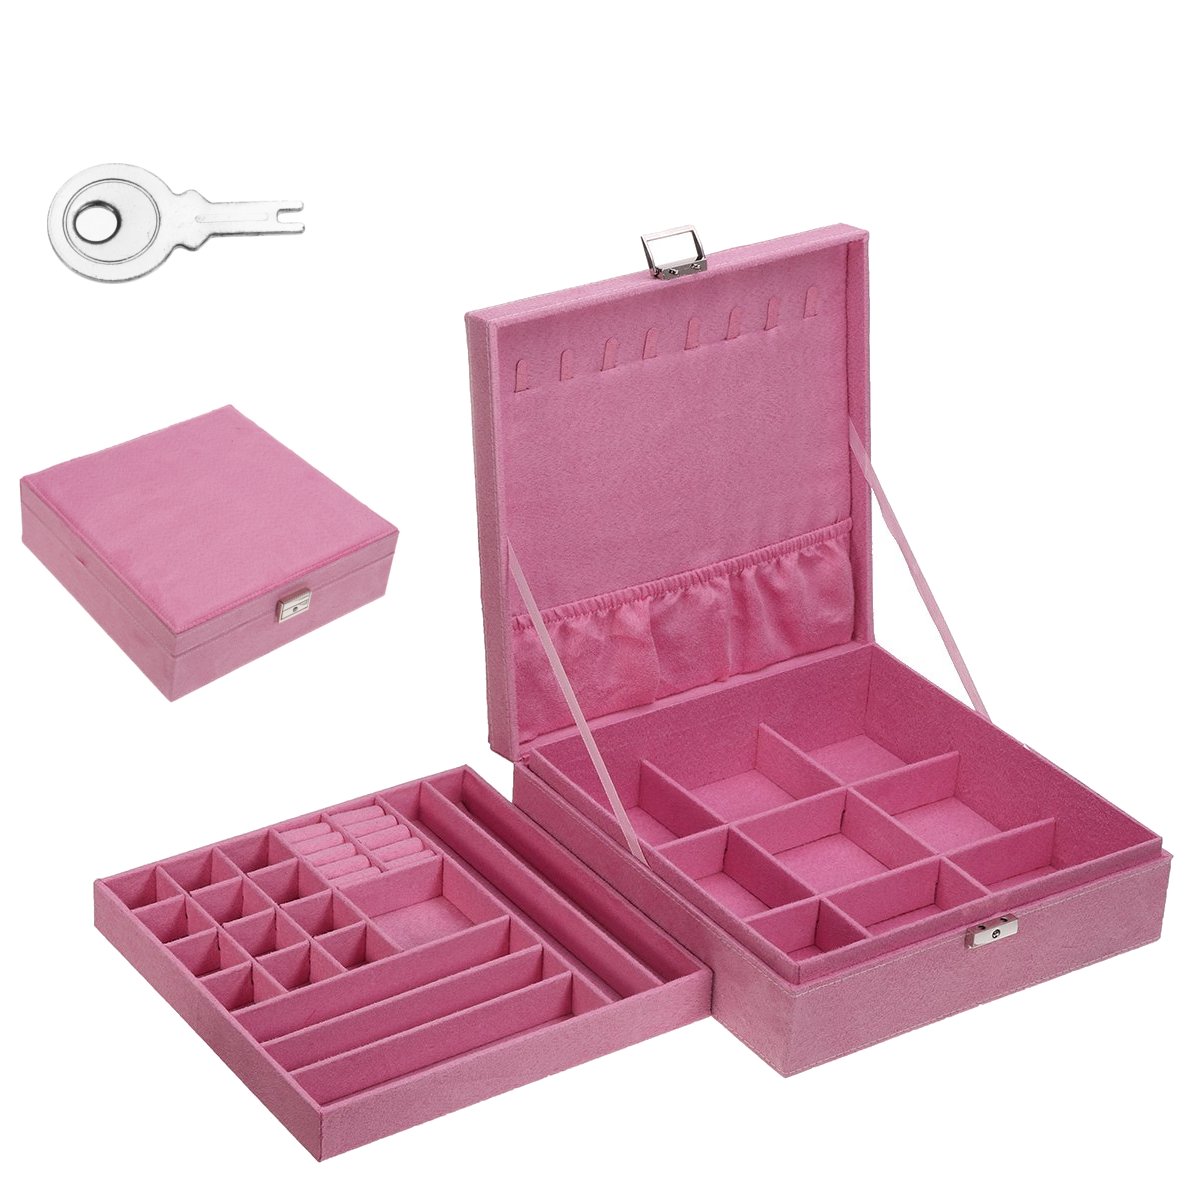 Multi-function-Vintage-Jewelry-Box-Organizers-Two-layer-Lockable-Jewelry-Display-Storage-Case-1855370-24